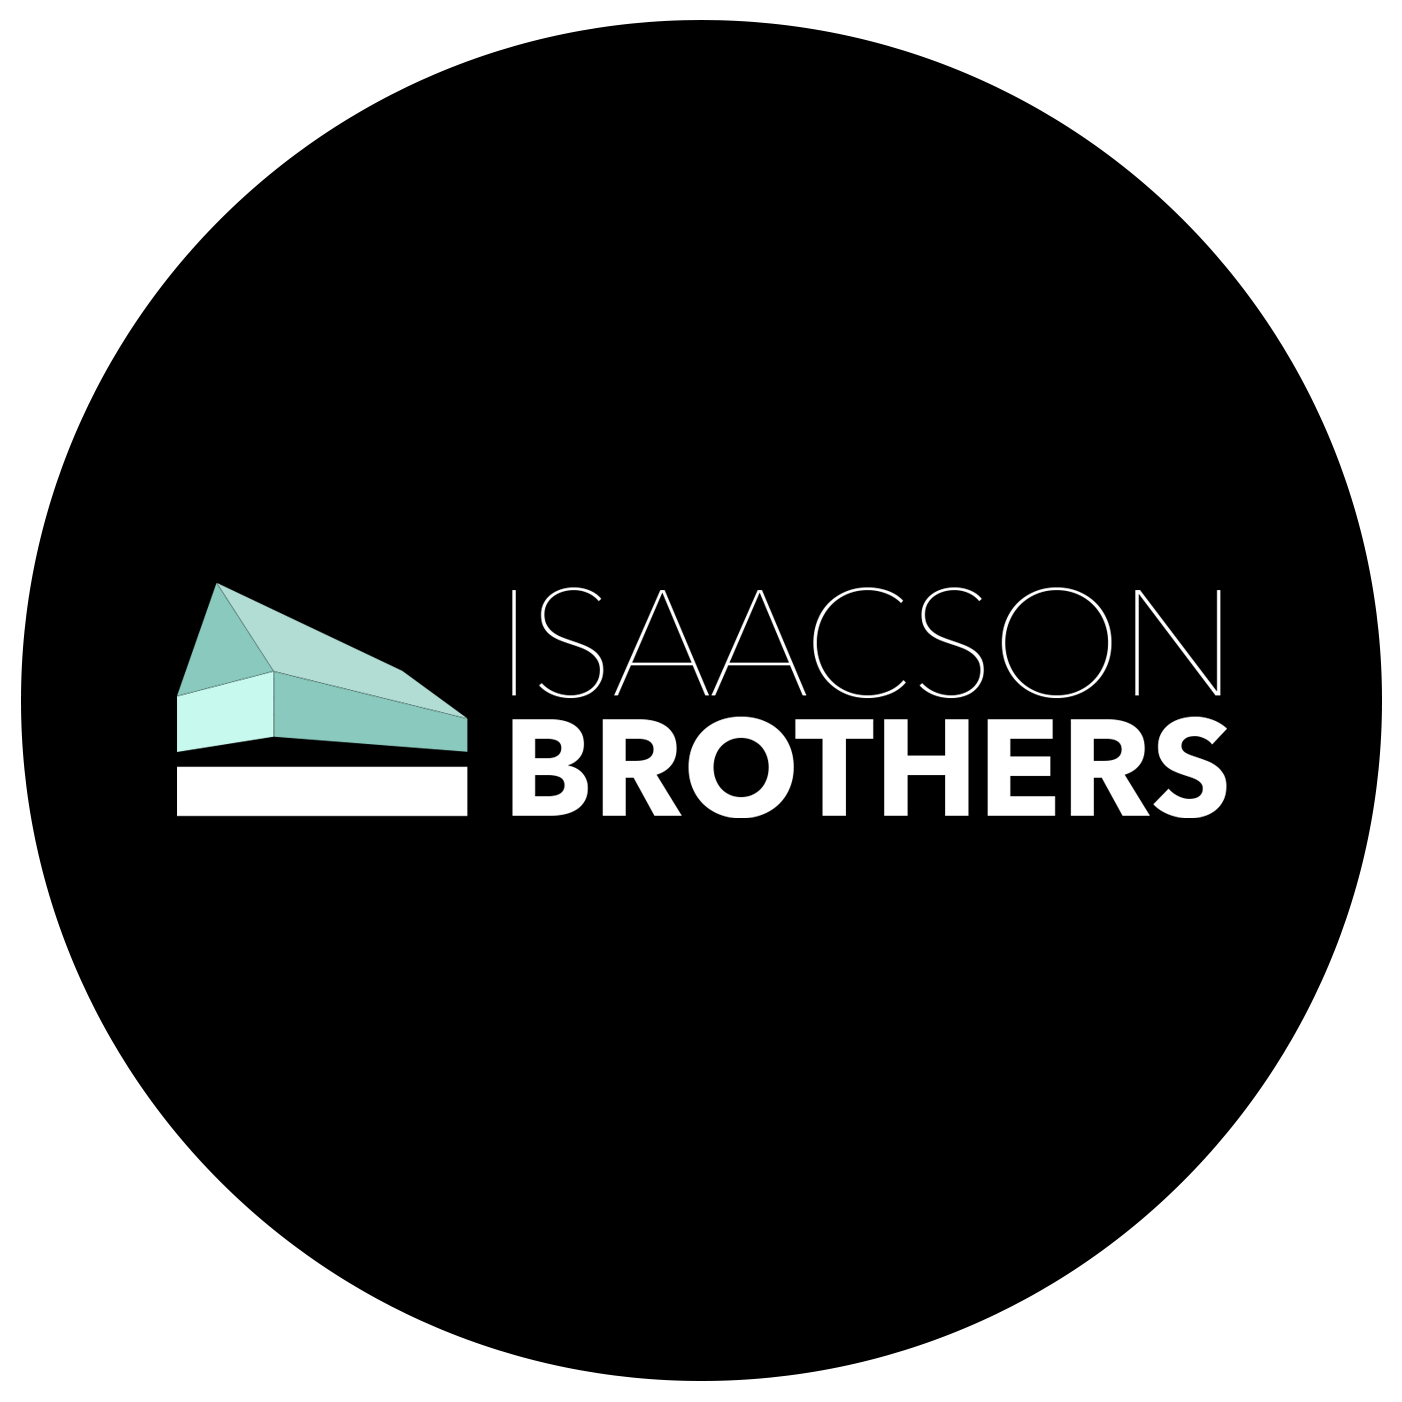 The Isaacson Brothers logo